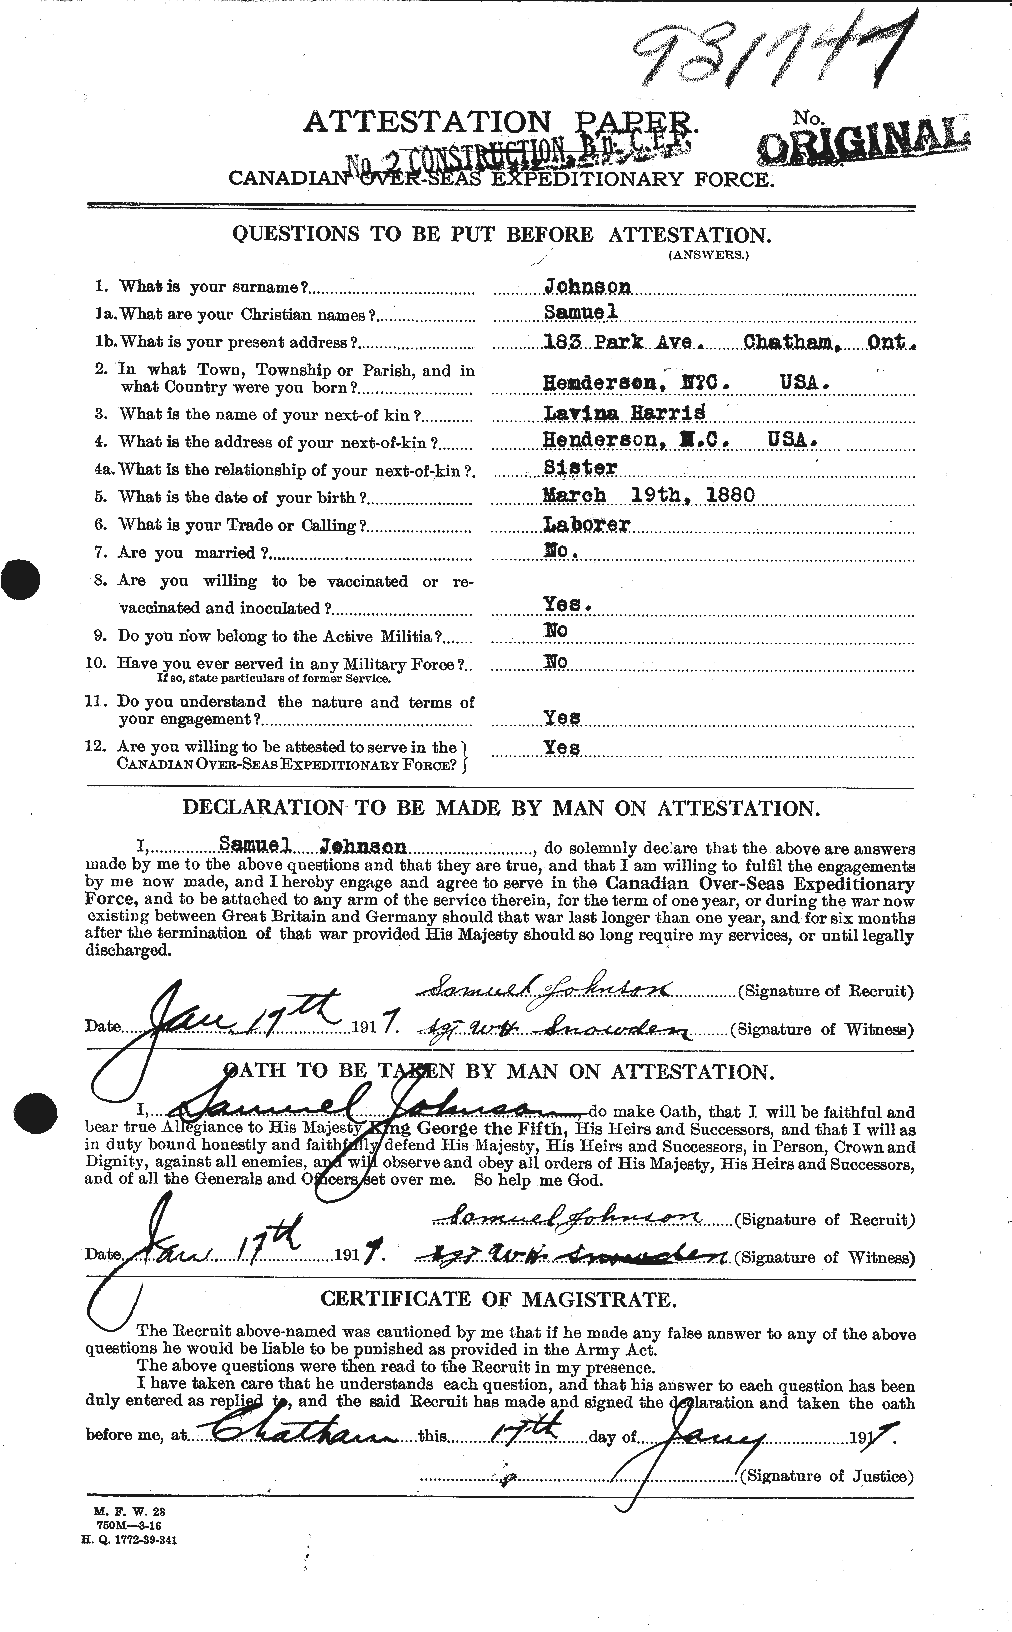 Personnel Records of the First World War - CEF 417424a